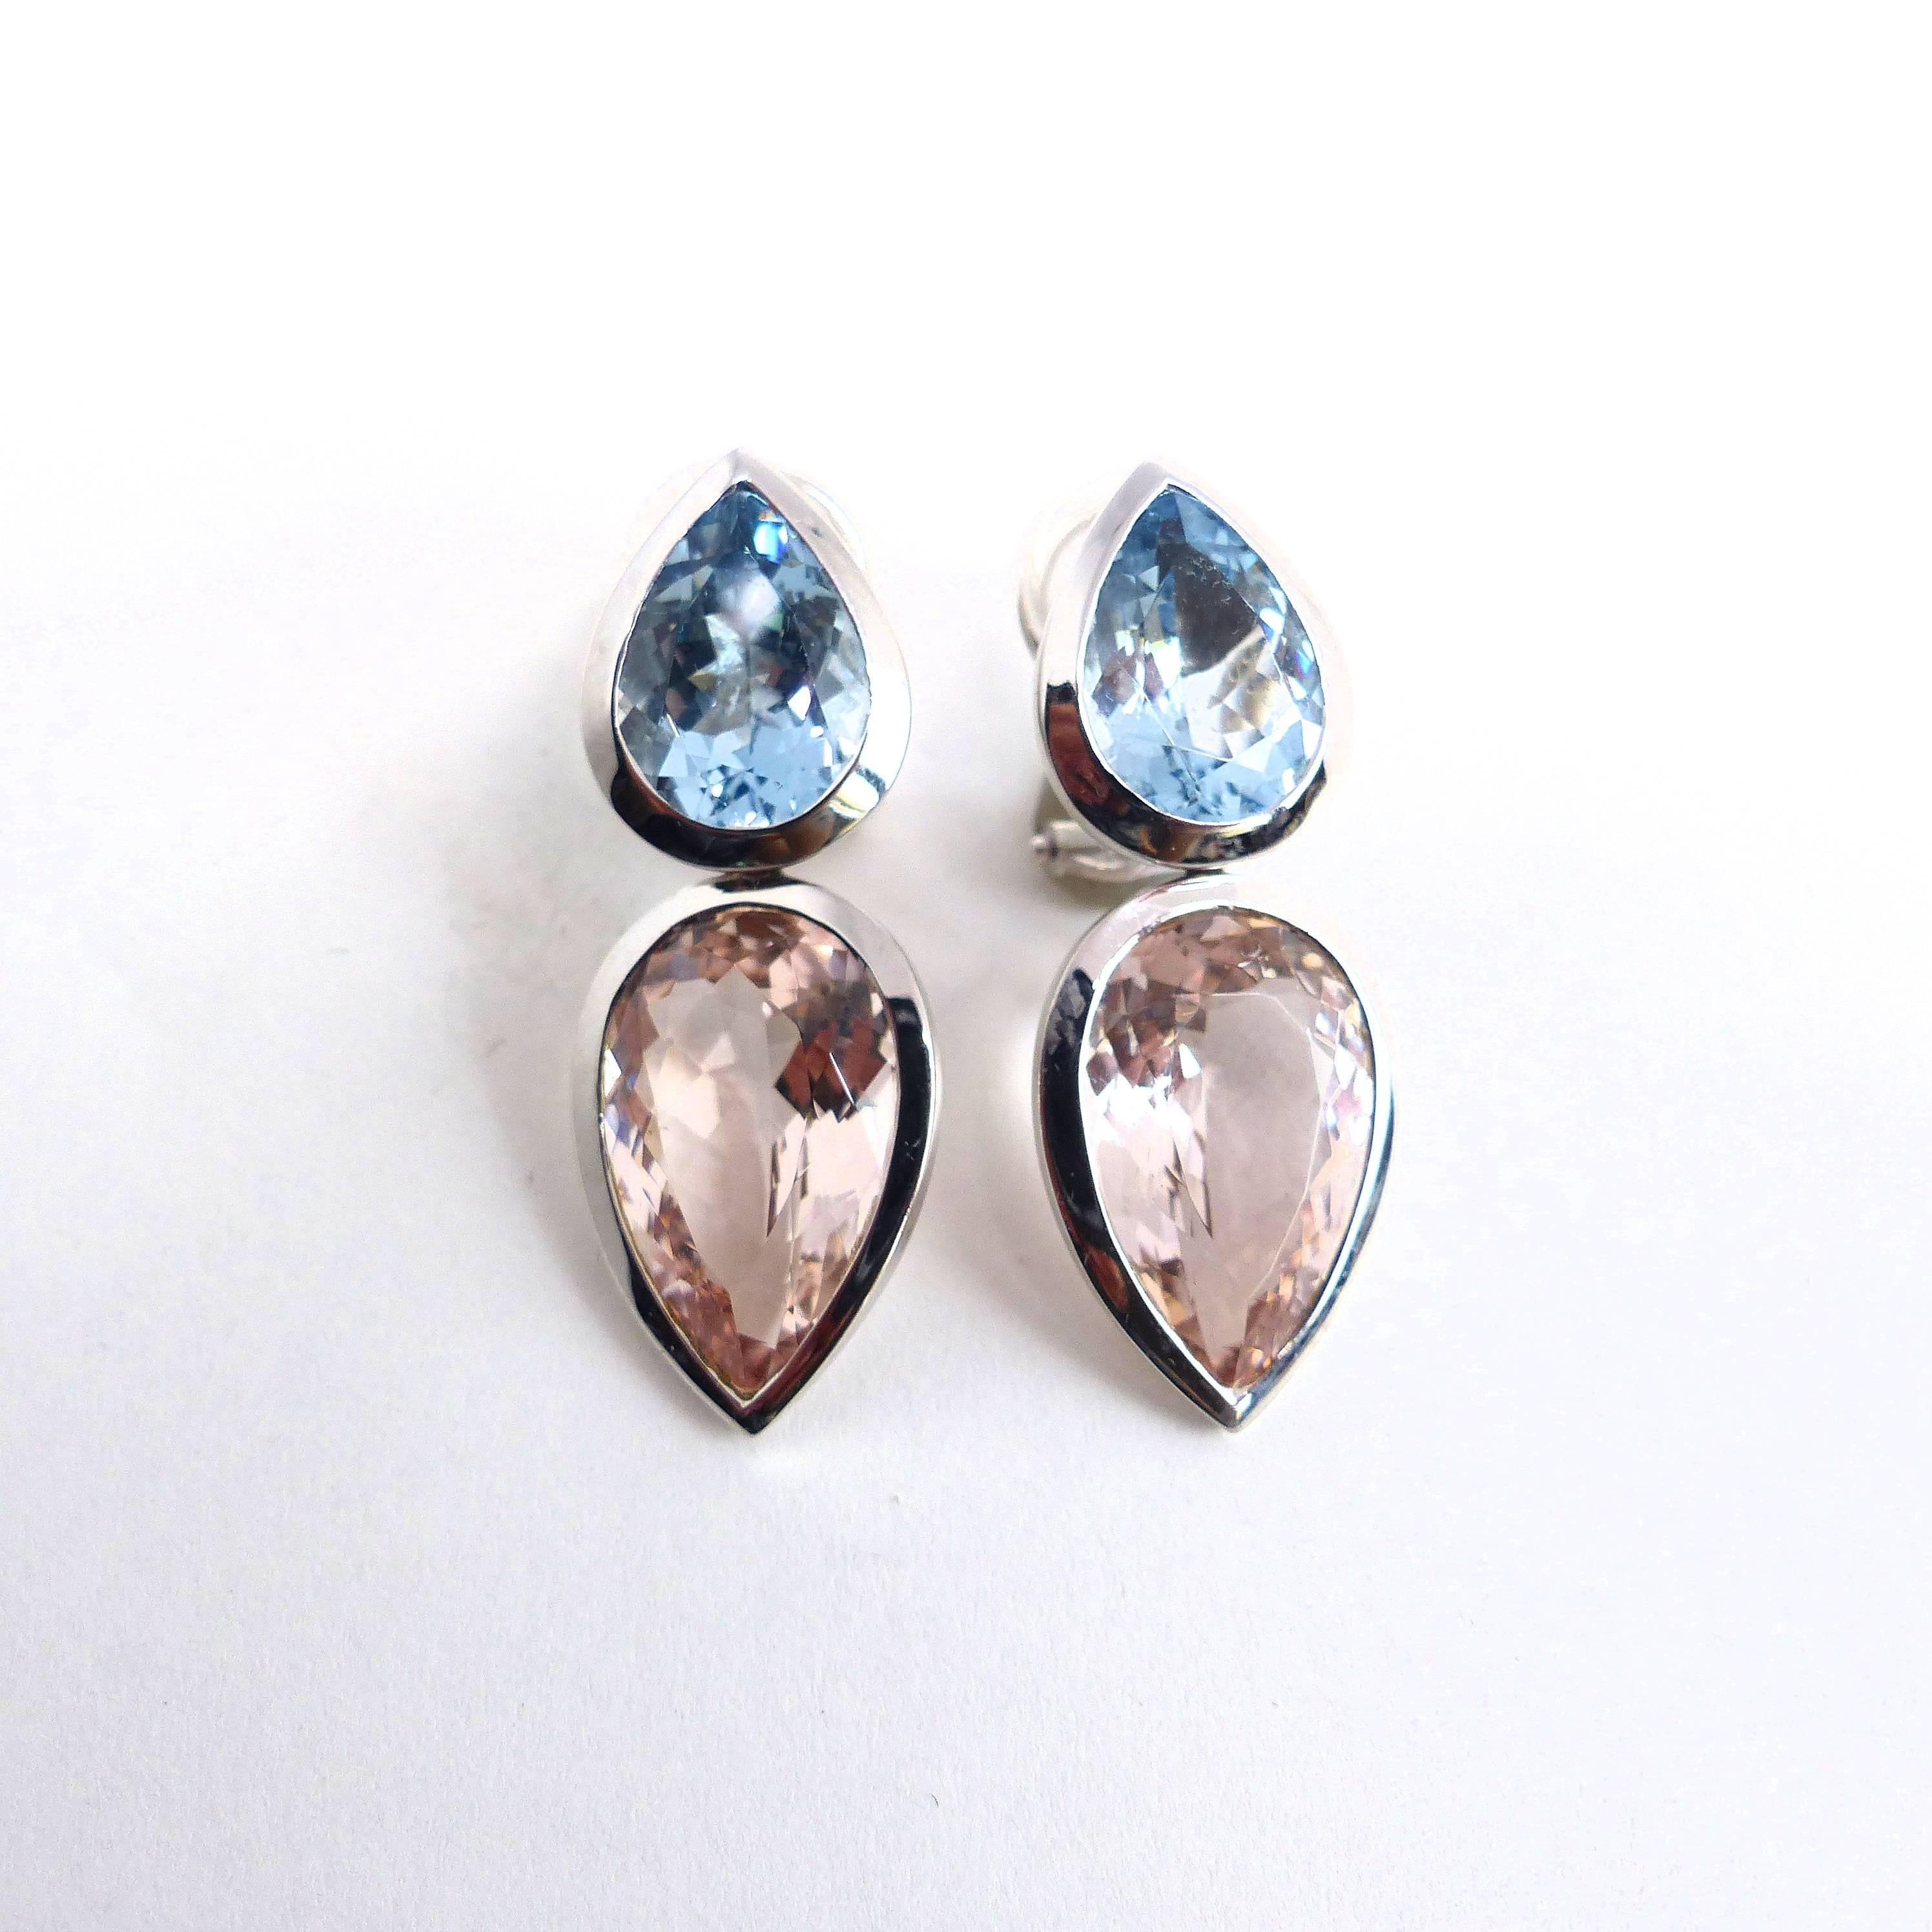 Thomas Leyser is renowned for his contemporary jewellery designs utilizing fine gemstones.

This 18k white gold (15.46g) pair of earrings has 2 top quality Aquamarines, facetted in pear shape (12x9mm, 5.77ct) + 2 top quality Morganites, facetted in